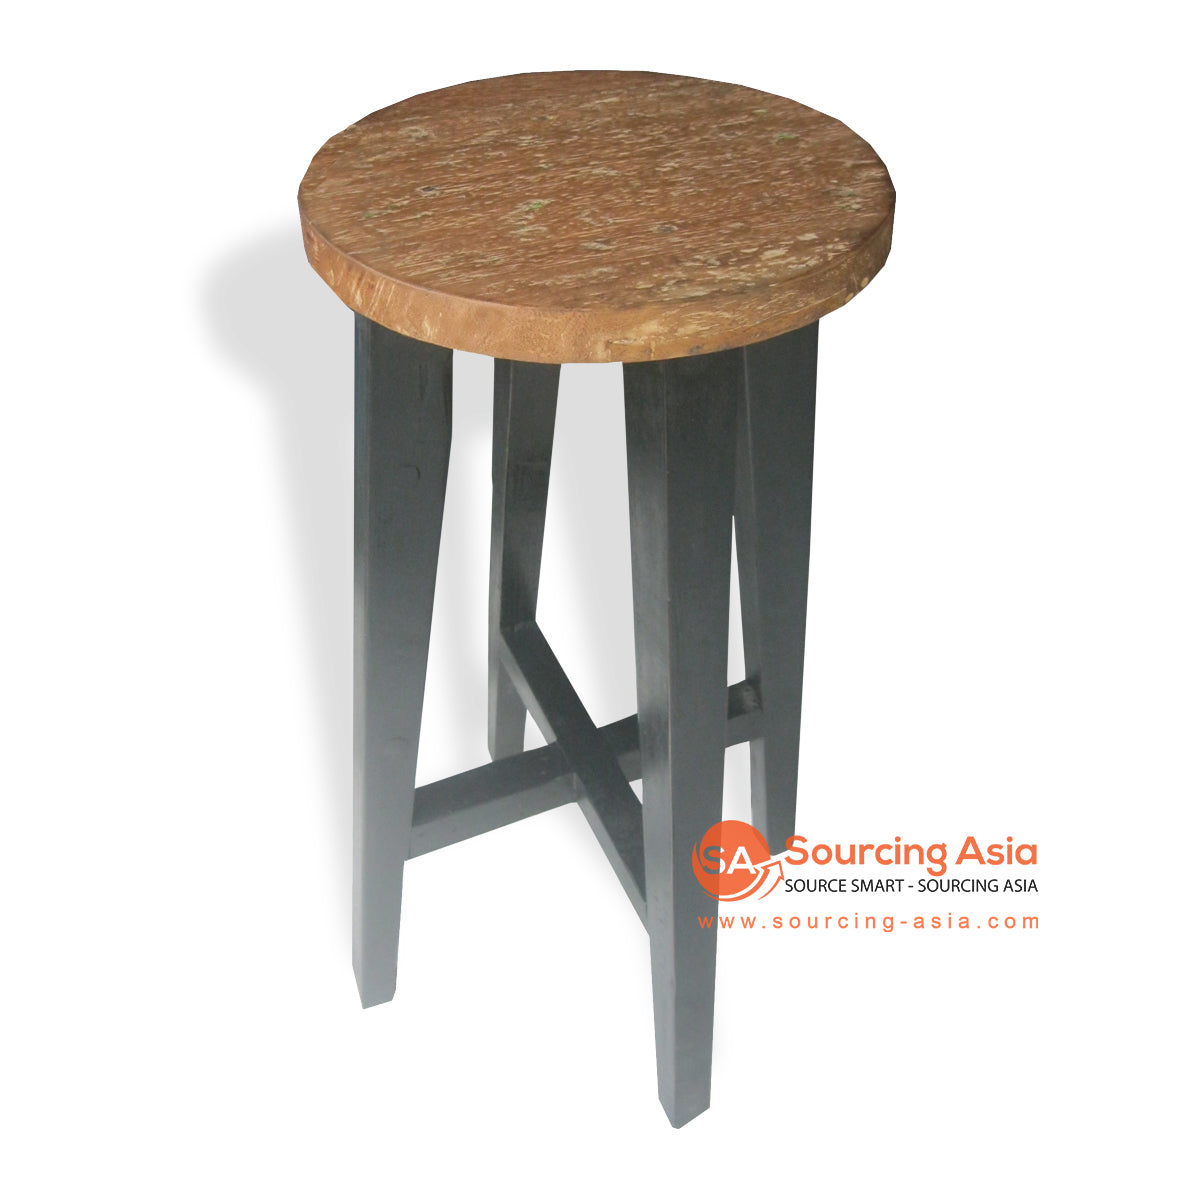 MRY089 BLACK AND BROWN TEAK WOOD OLD STYLE BAR STOOL